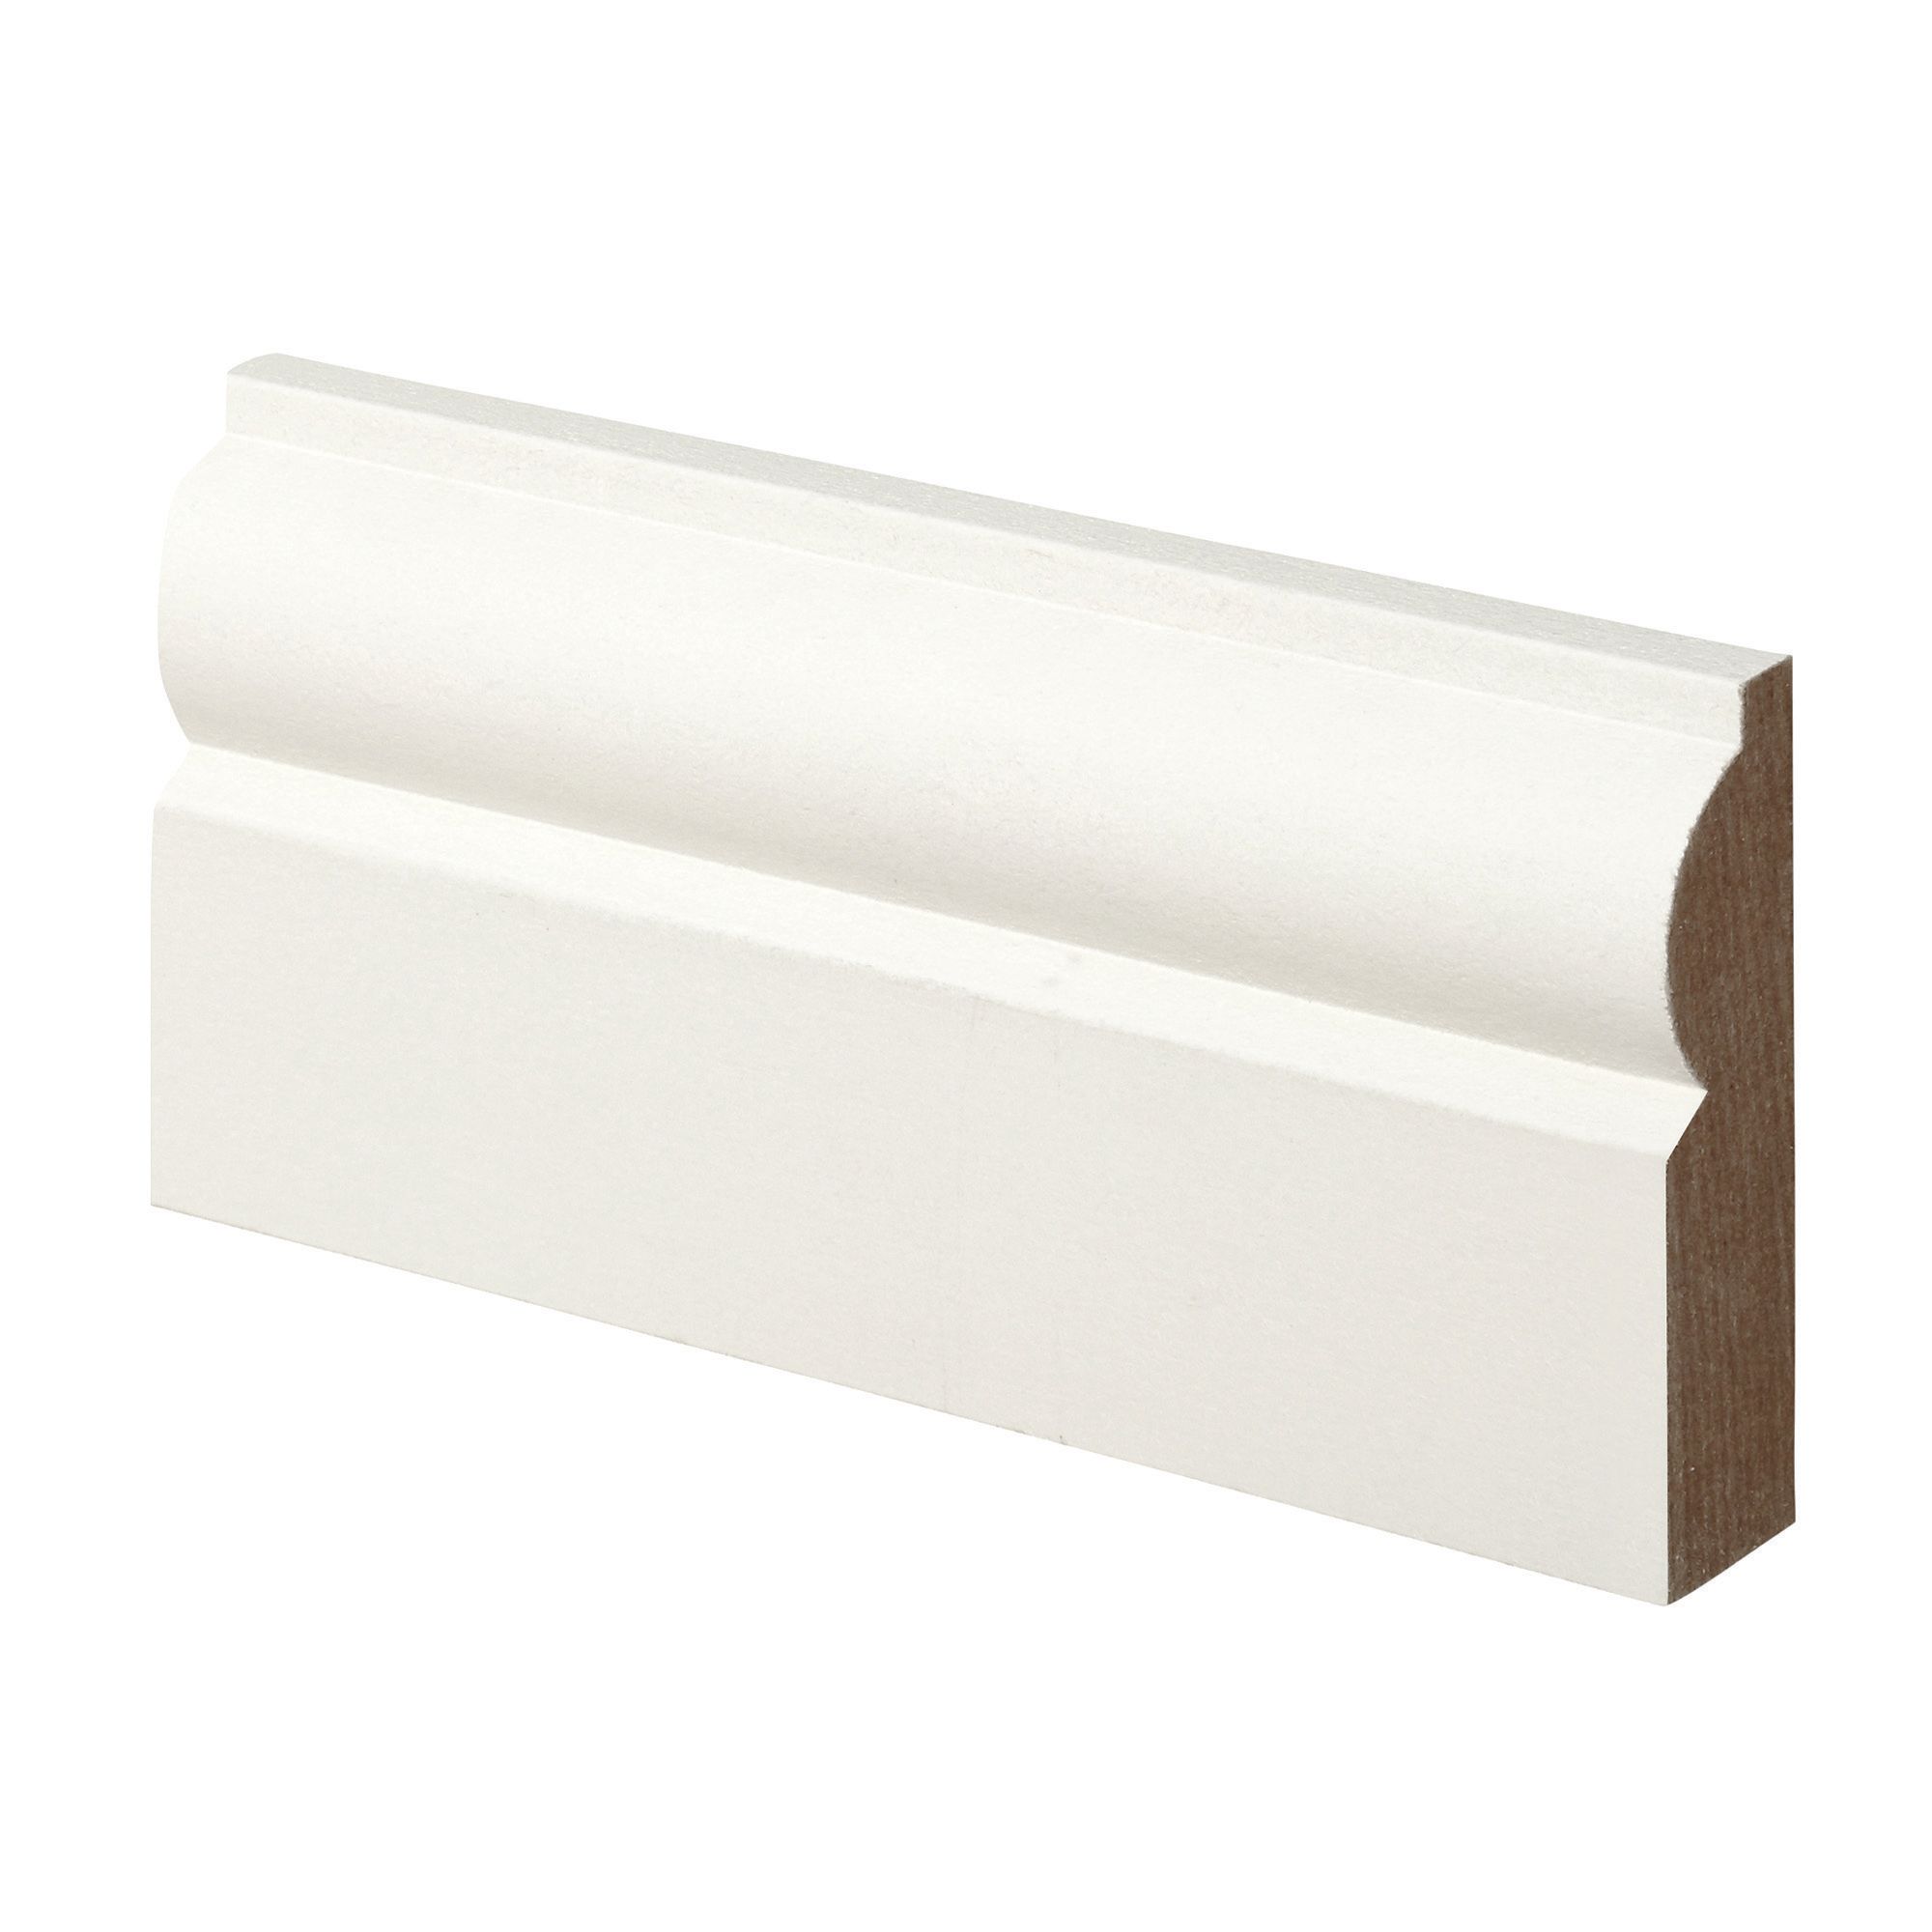 Image of Wickes Torus Primed MDF Architrave - 18mm x 69mm x 2.1m